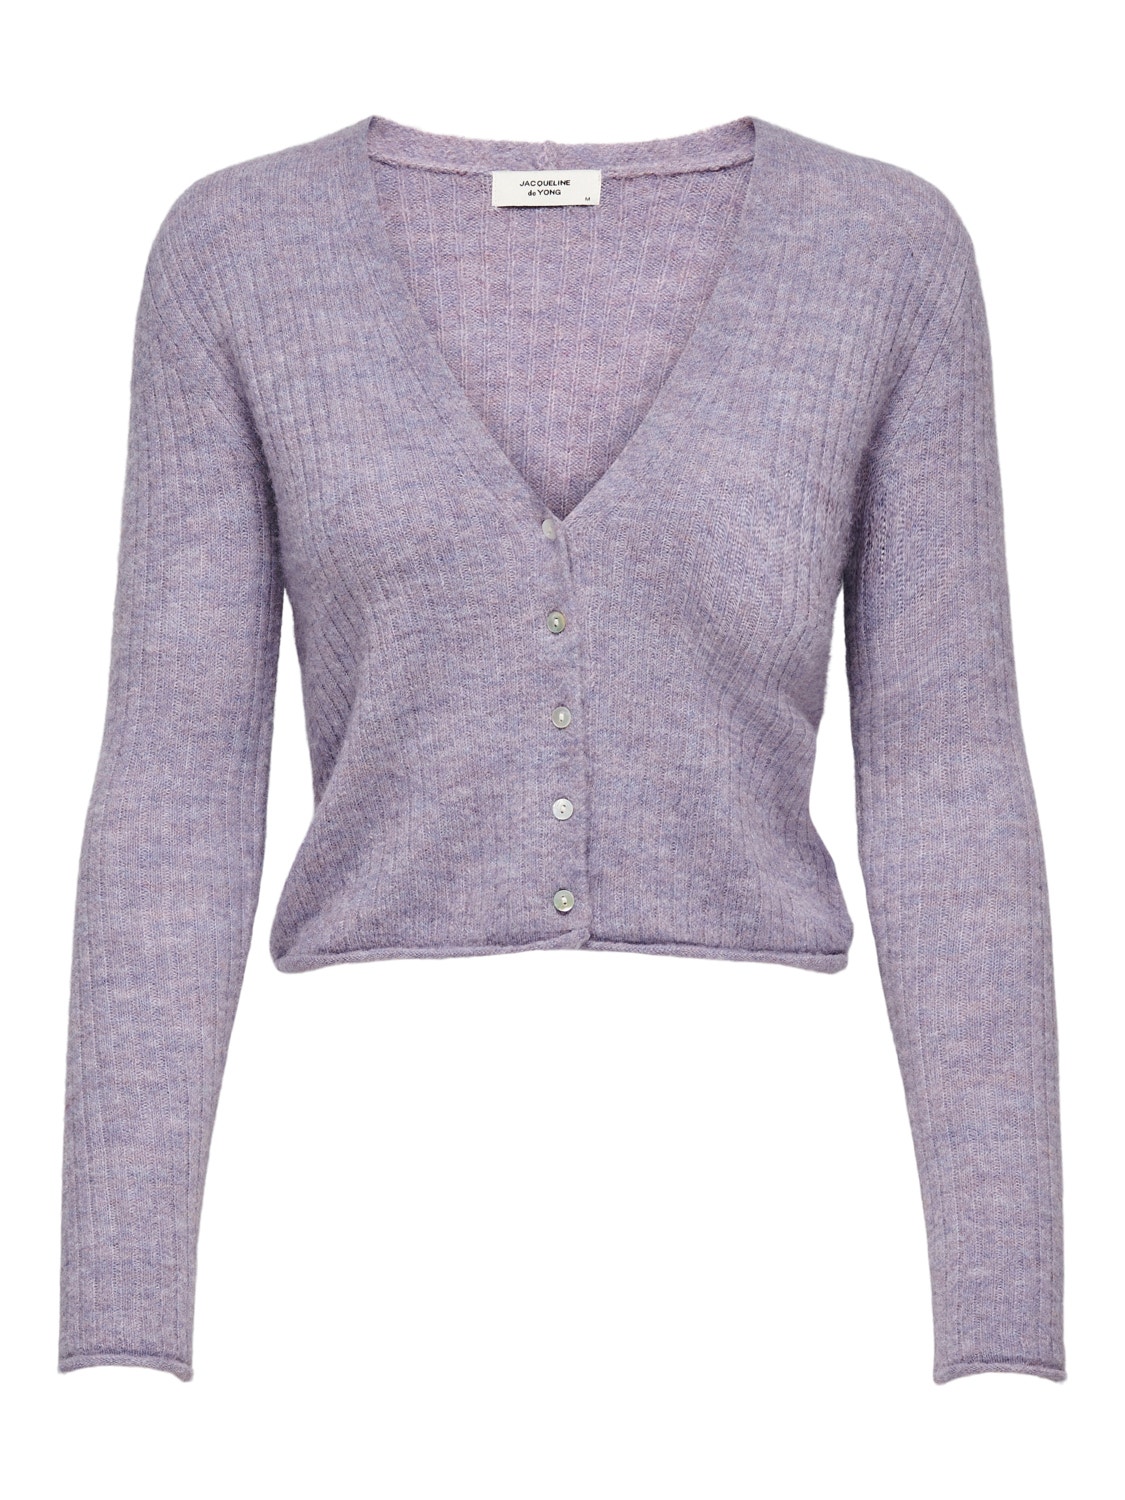 ONLY Solid Colored Knitted Cardigan -Lavender Gray - 15249700